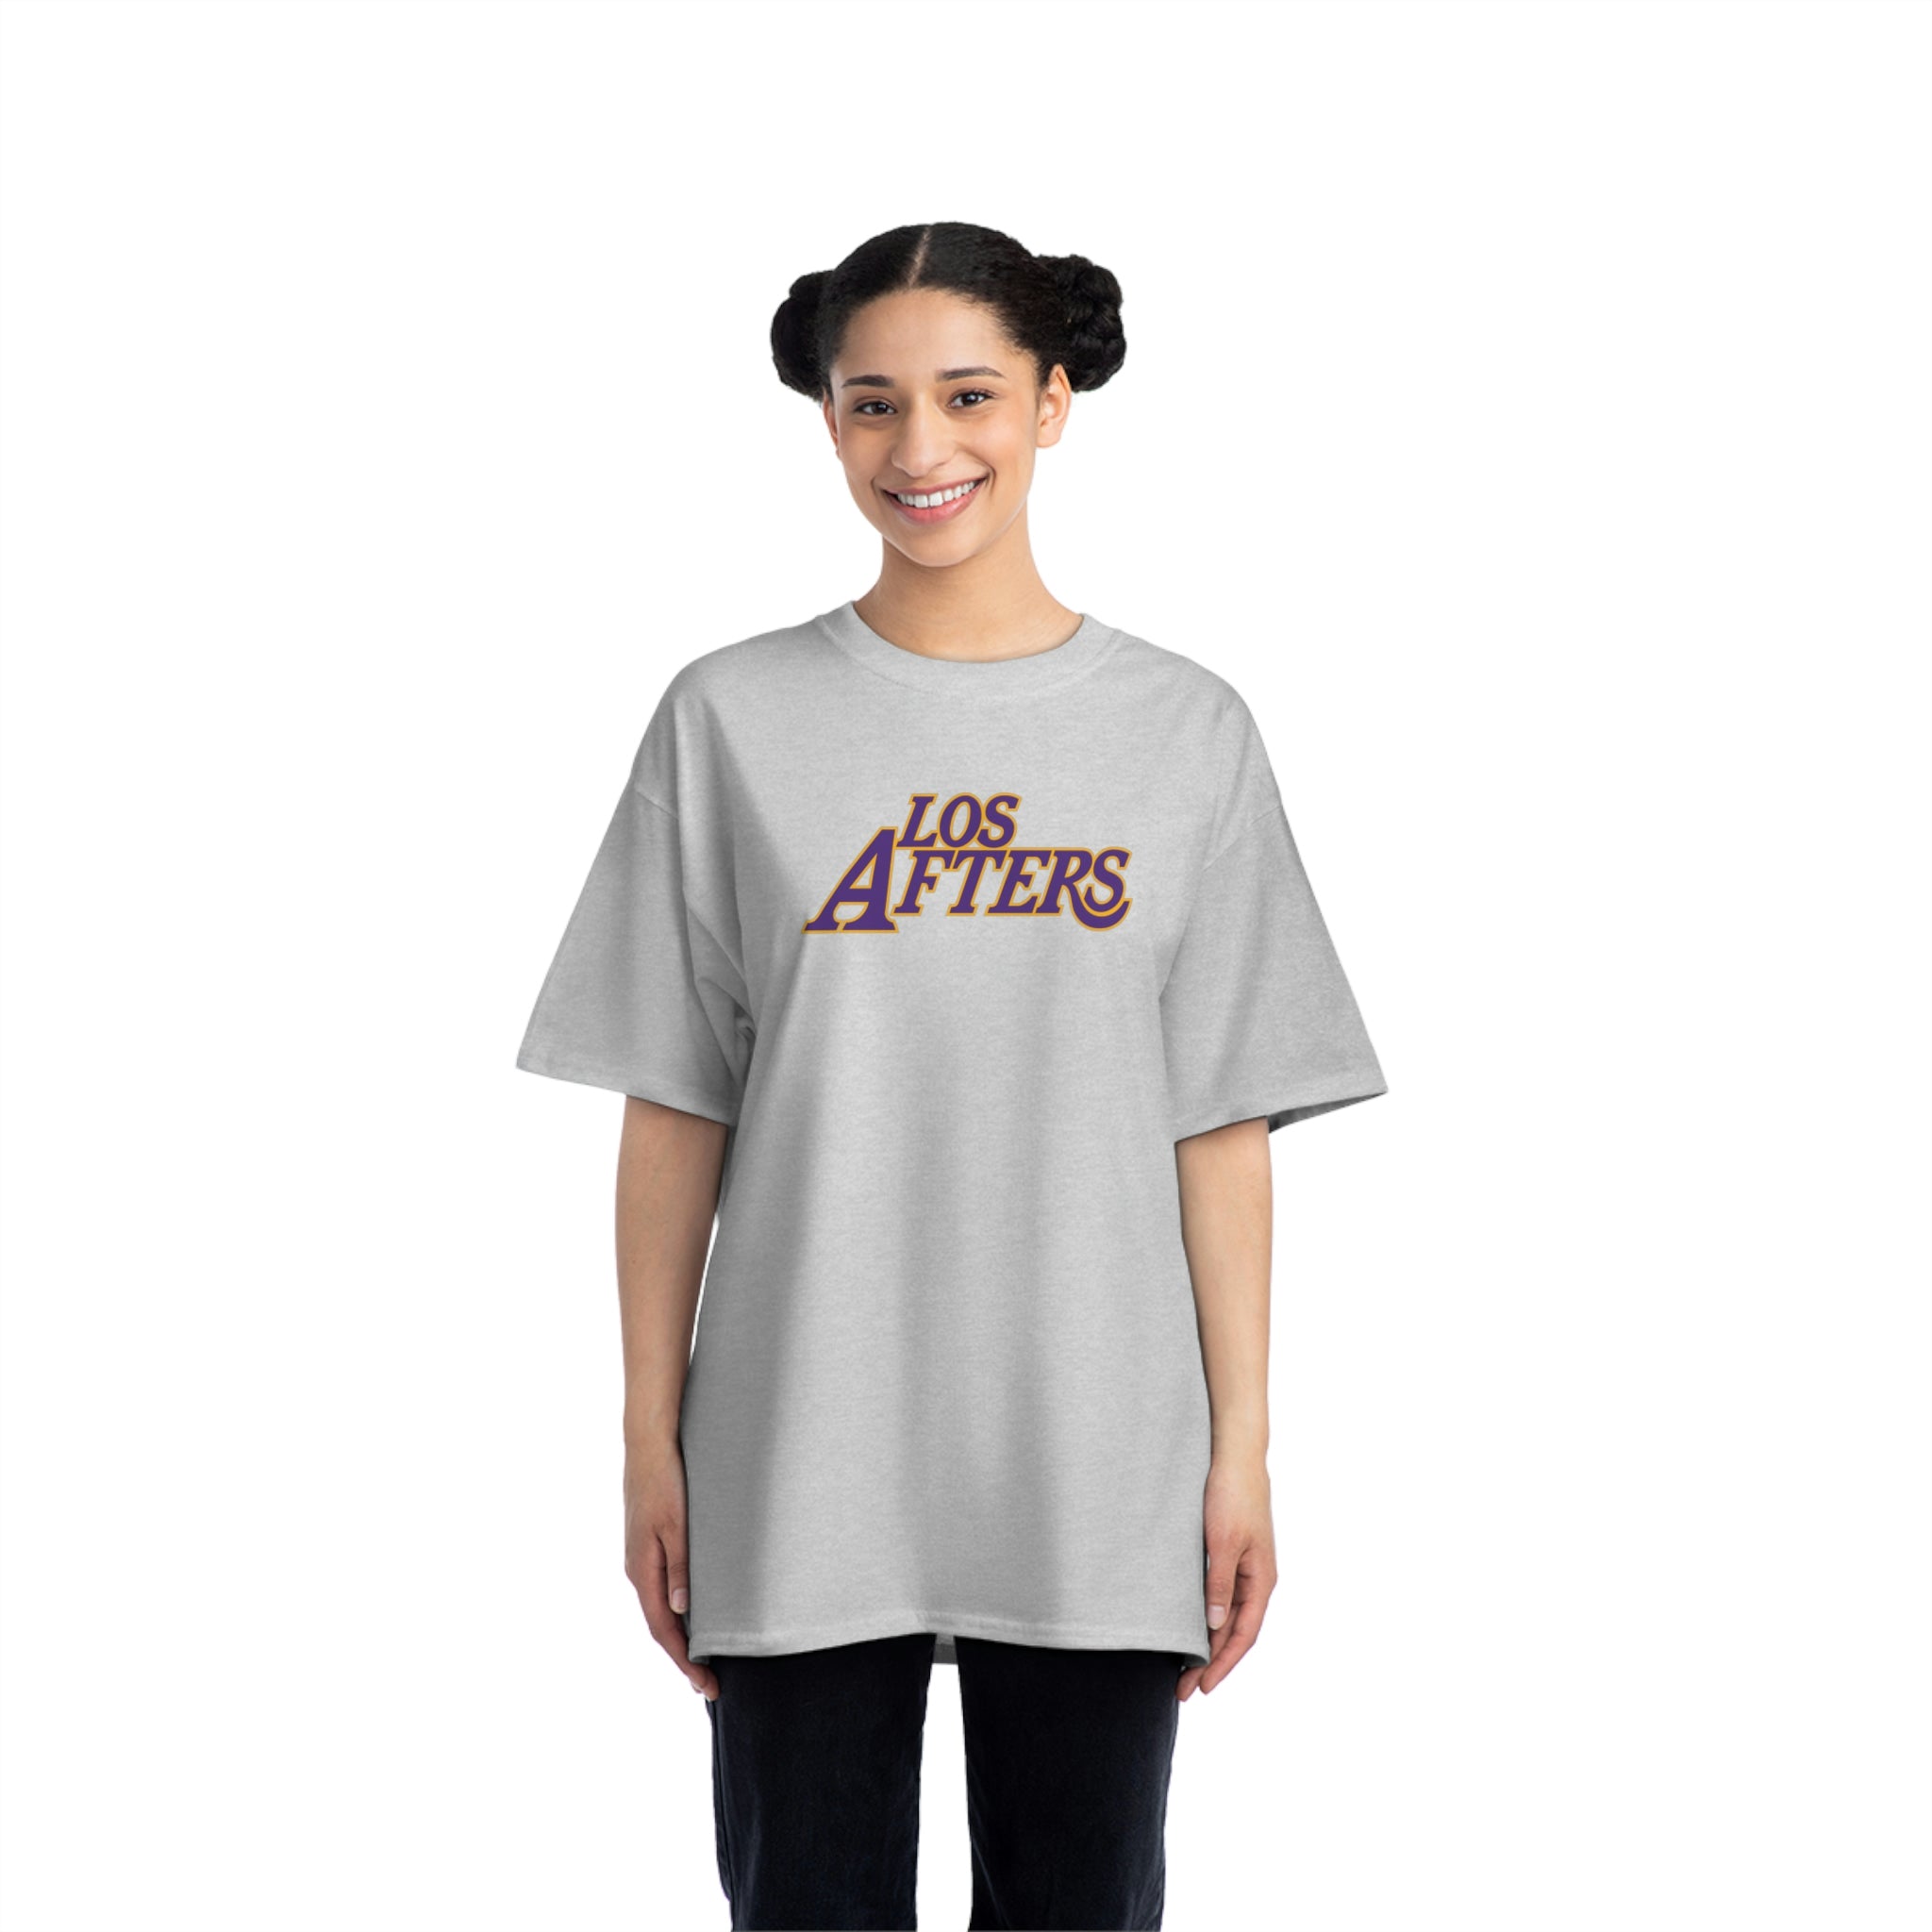 Los Afters Lakers Tee